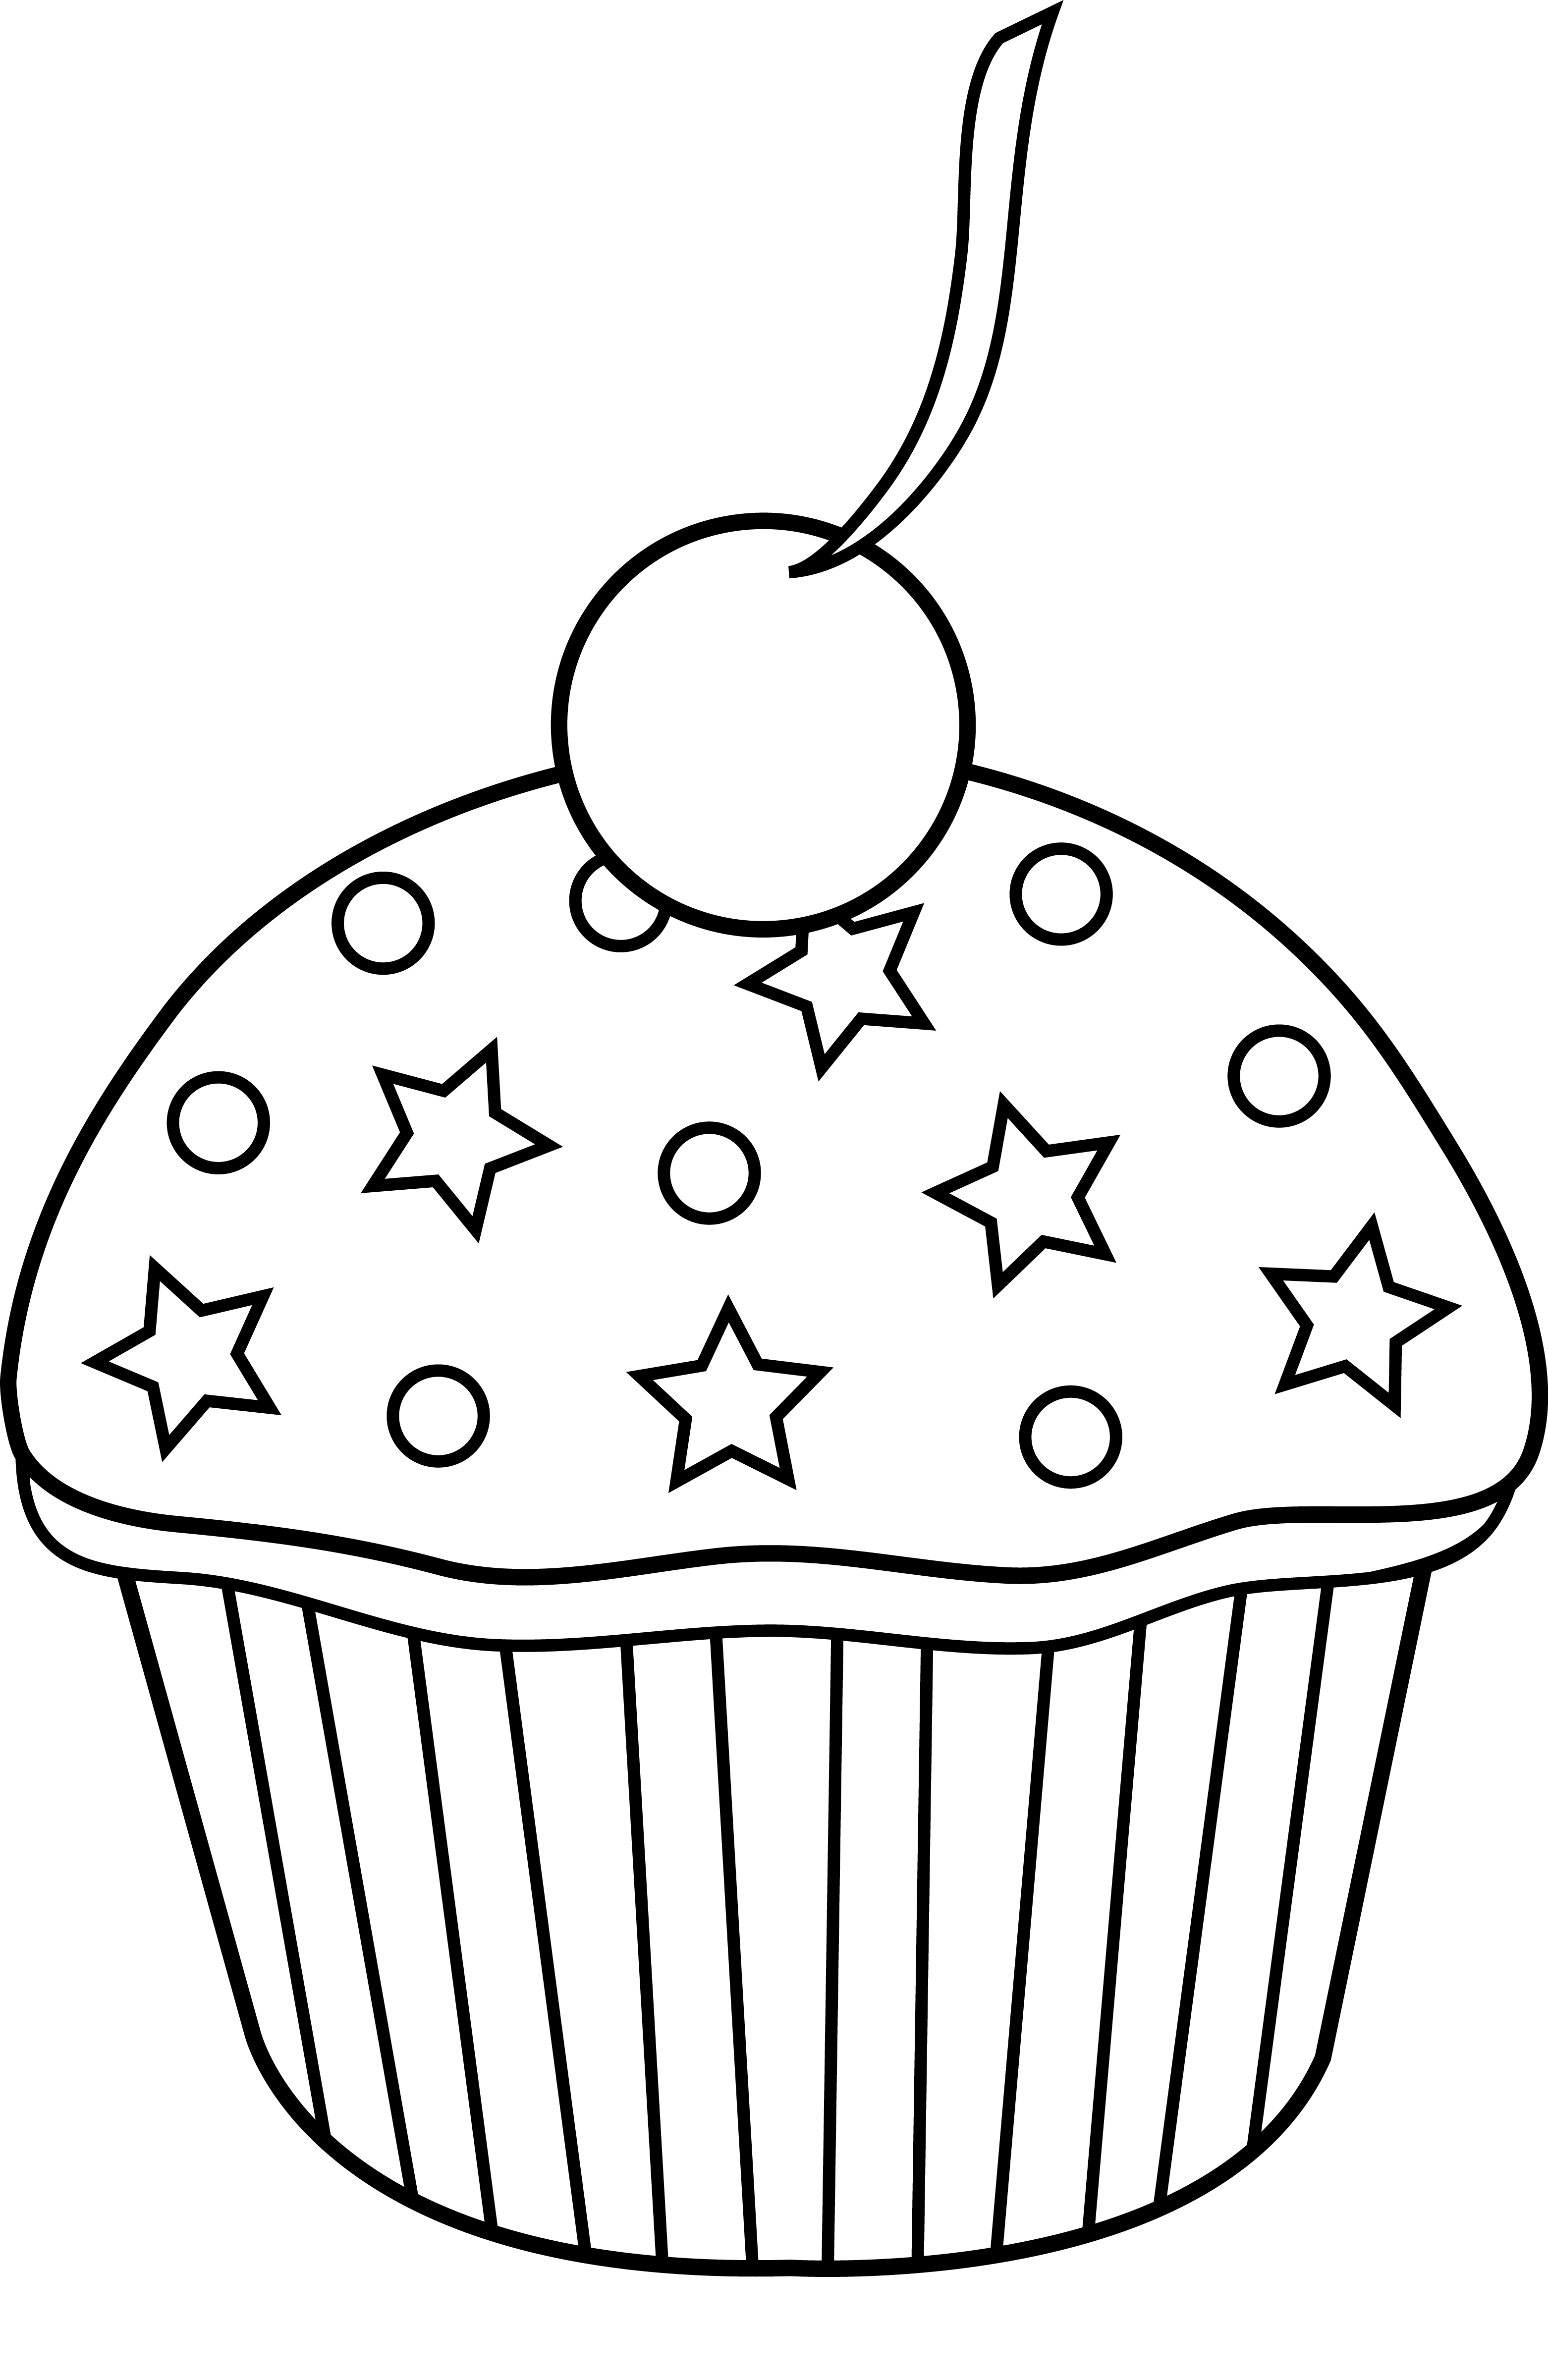 Black And White Food - ClipArt Best